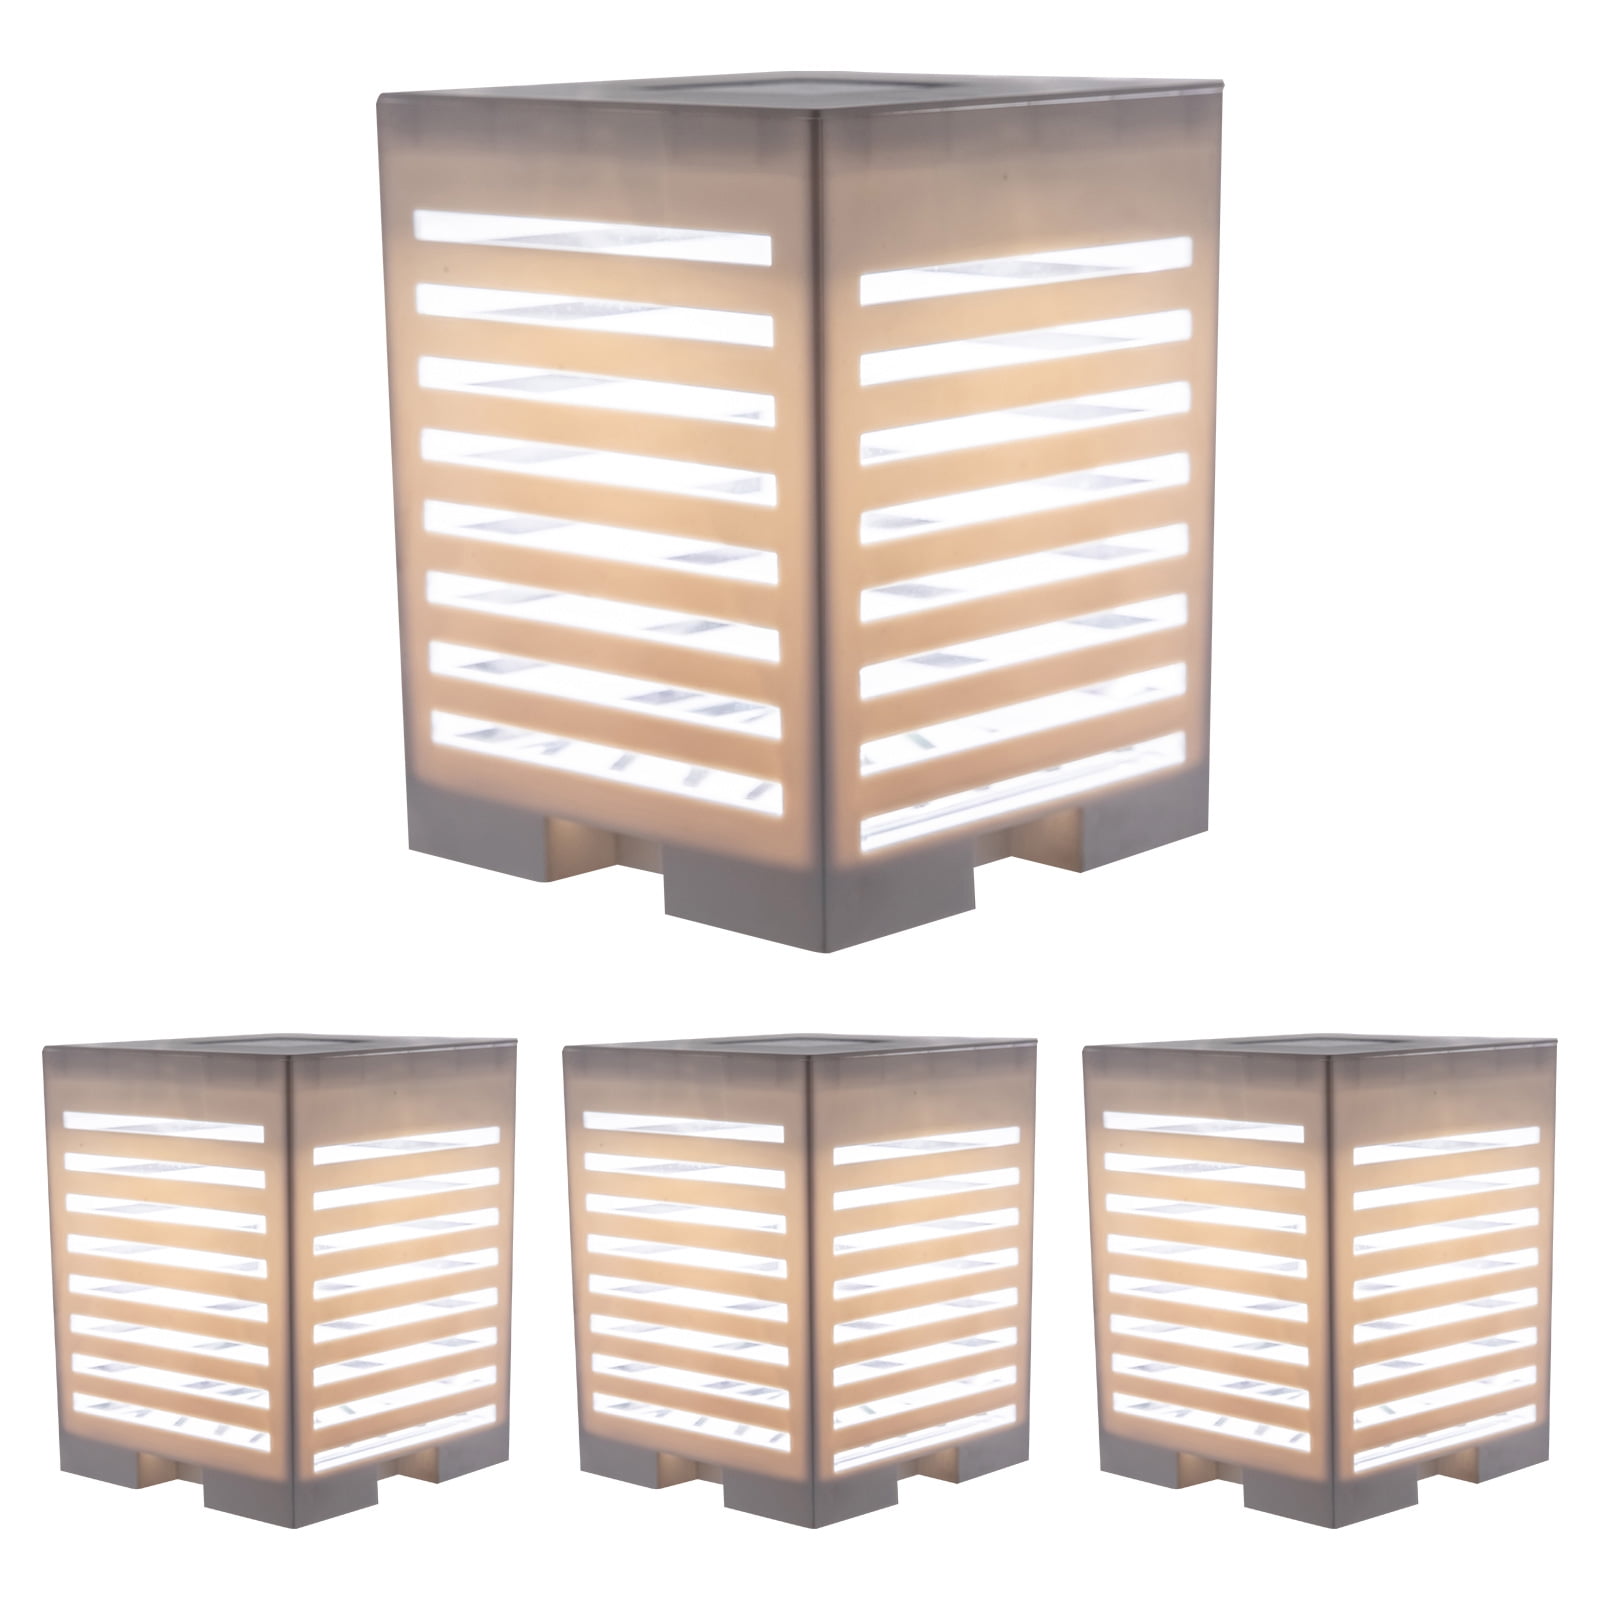 GreenLighting Pack Modern Grooved Solar Powered LED Post Cap Light for 4x4  or 5x5 Posts (White)